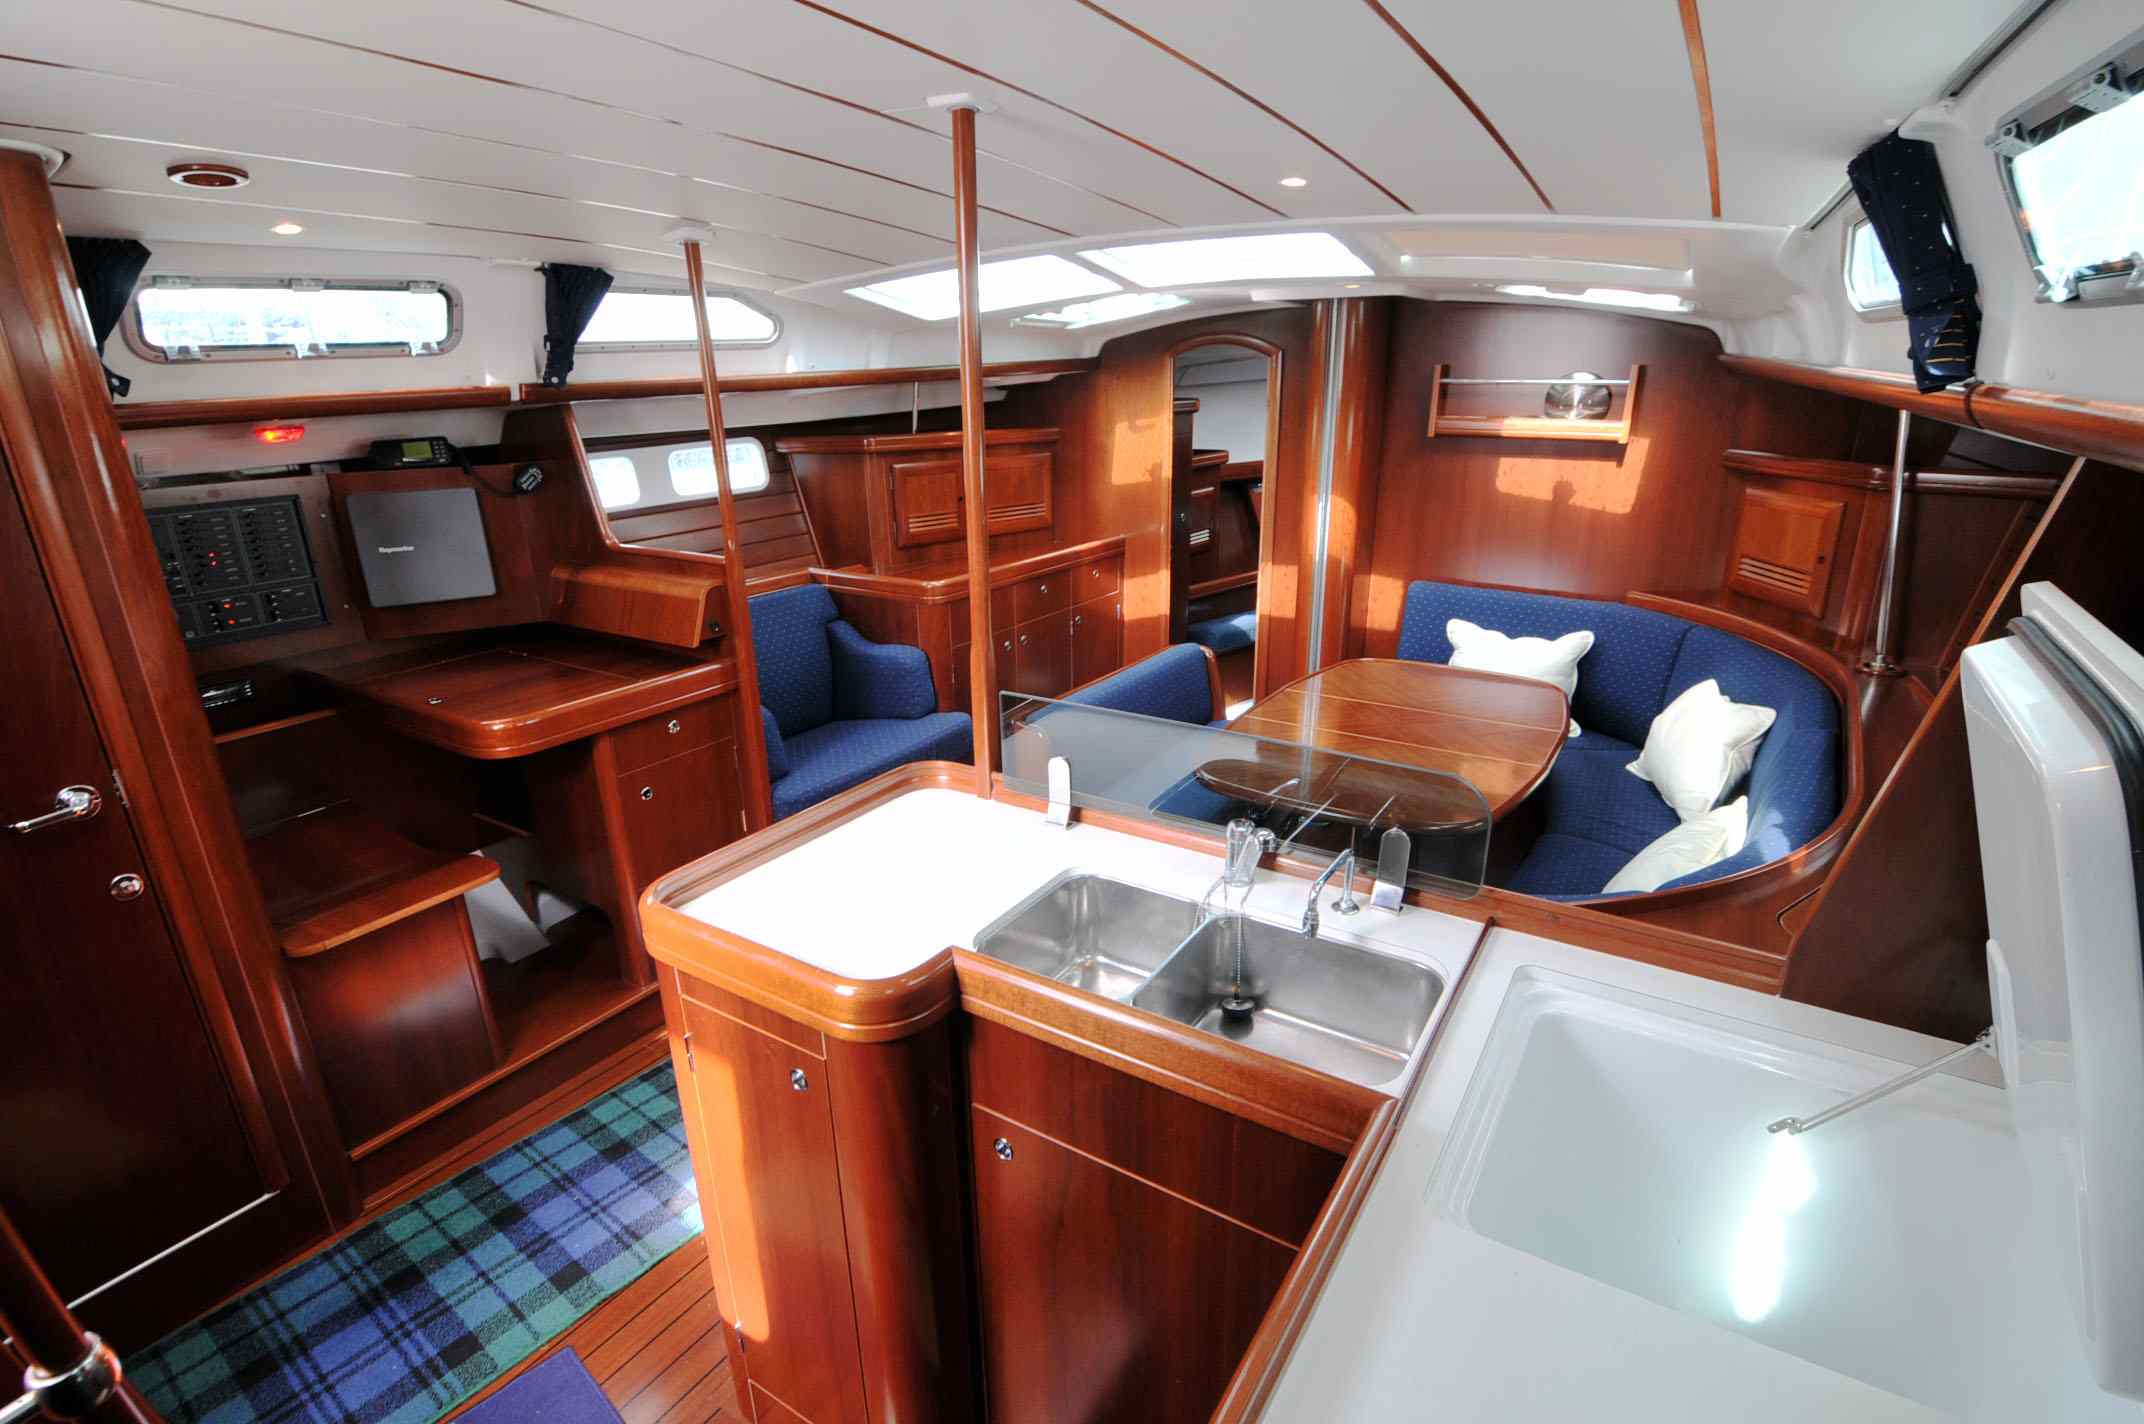 beneteau oceanis 473 - Yacht Charter Firth of Clyde & Boat hire in United Kingdom Scotland Firth of Clyde Ardrossan Marina Clyde 3